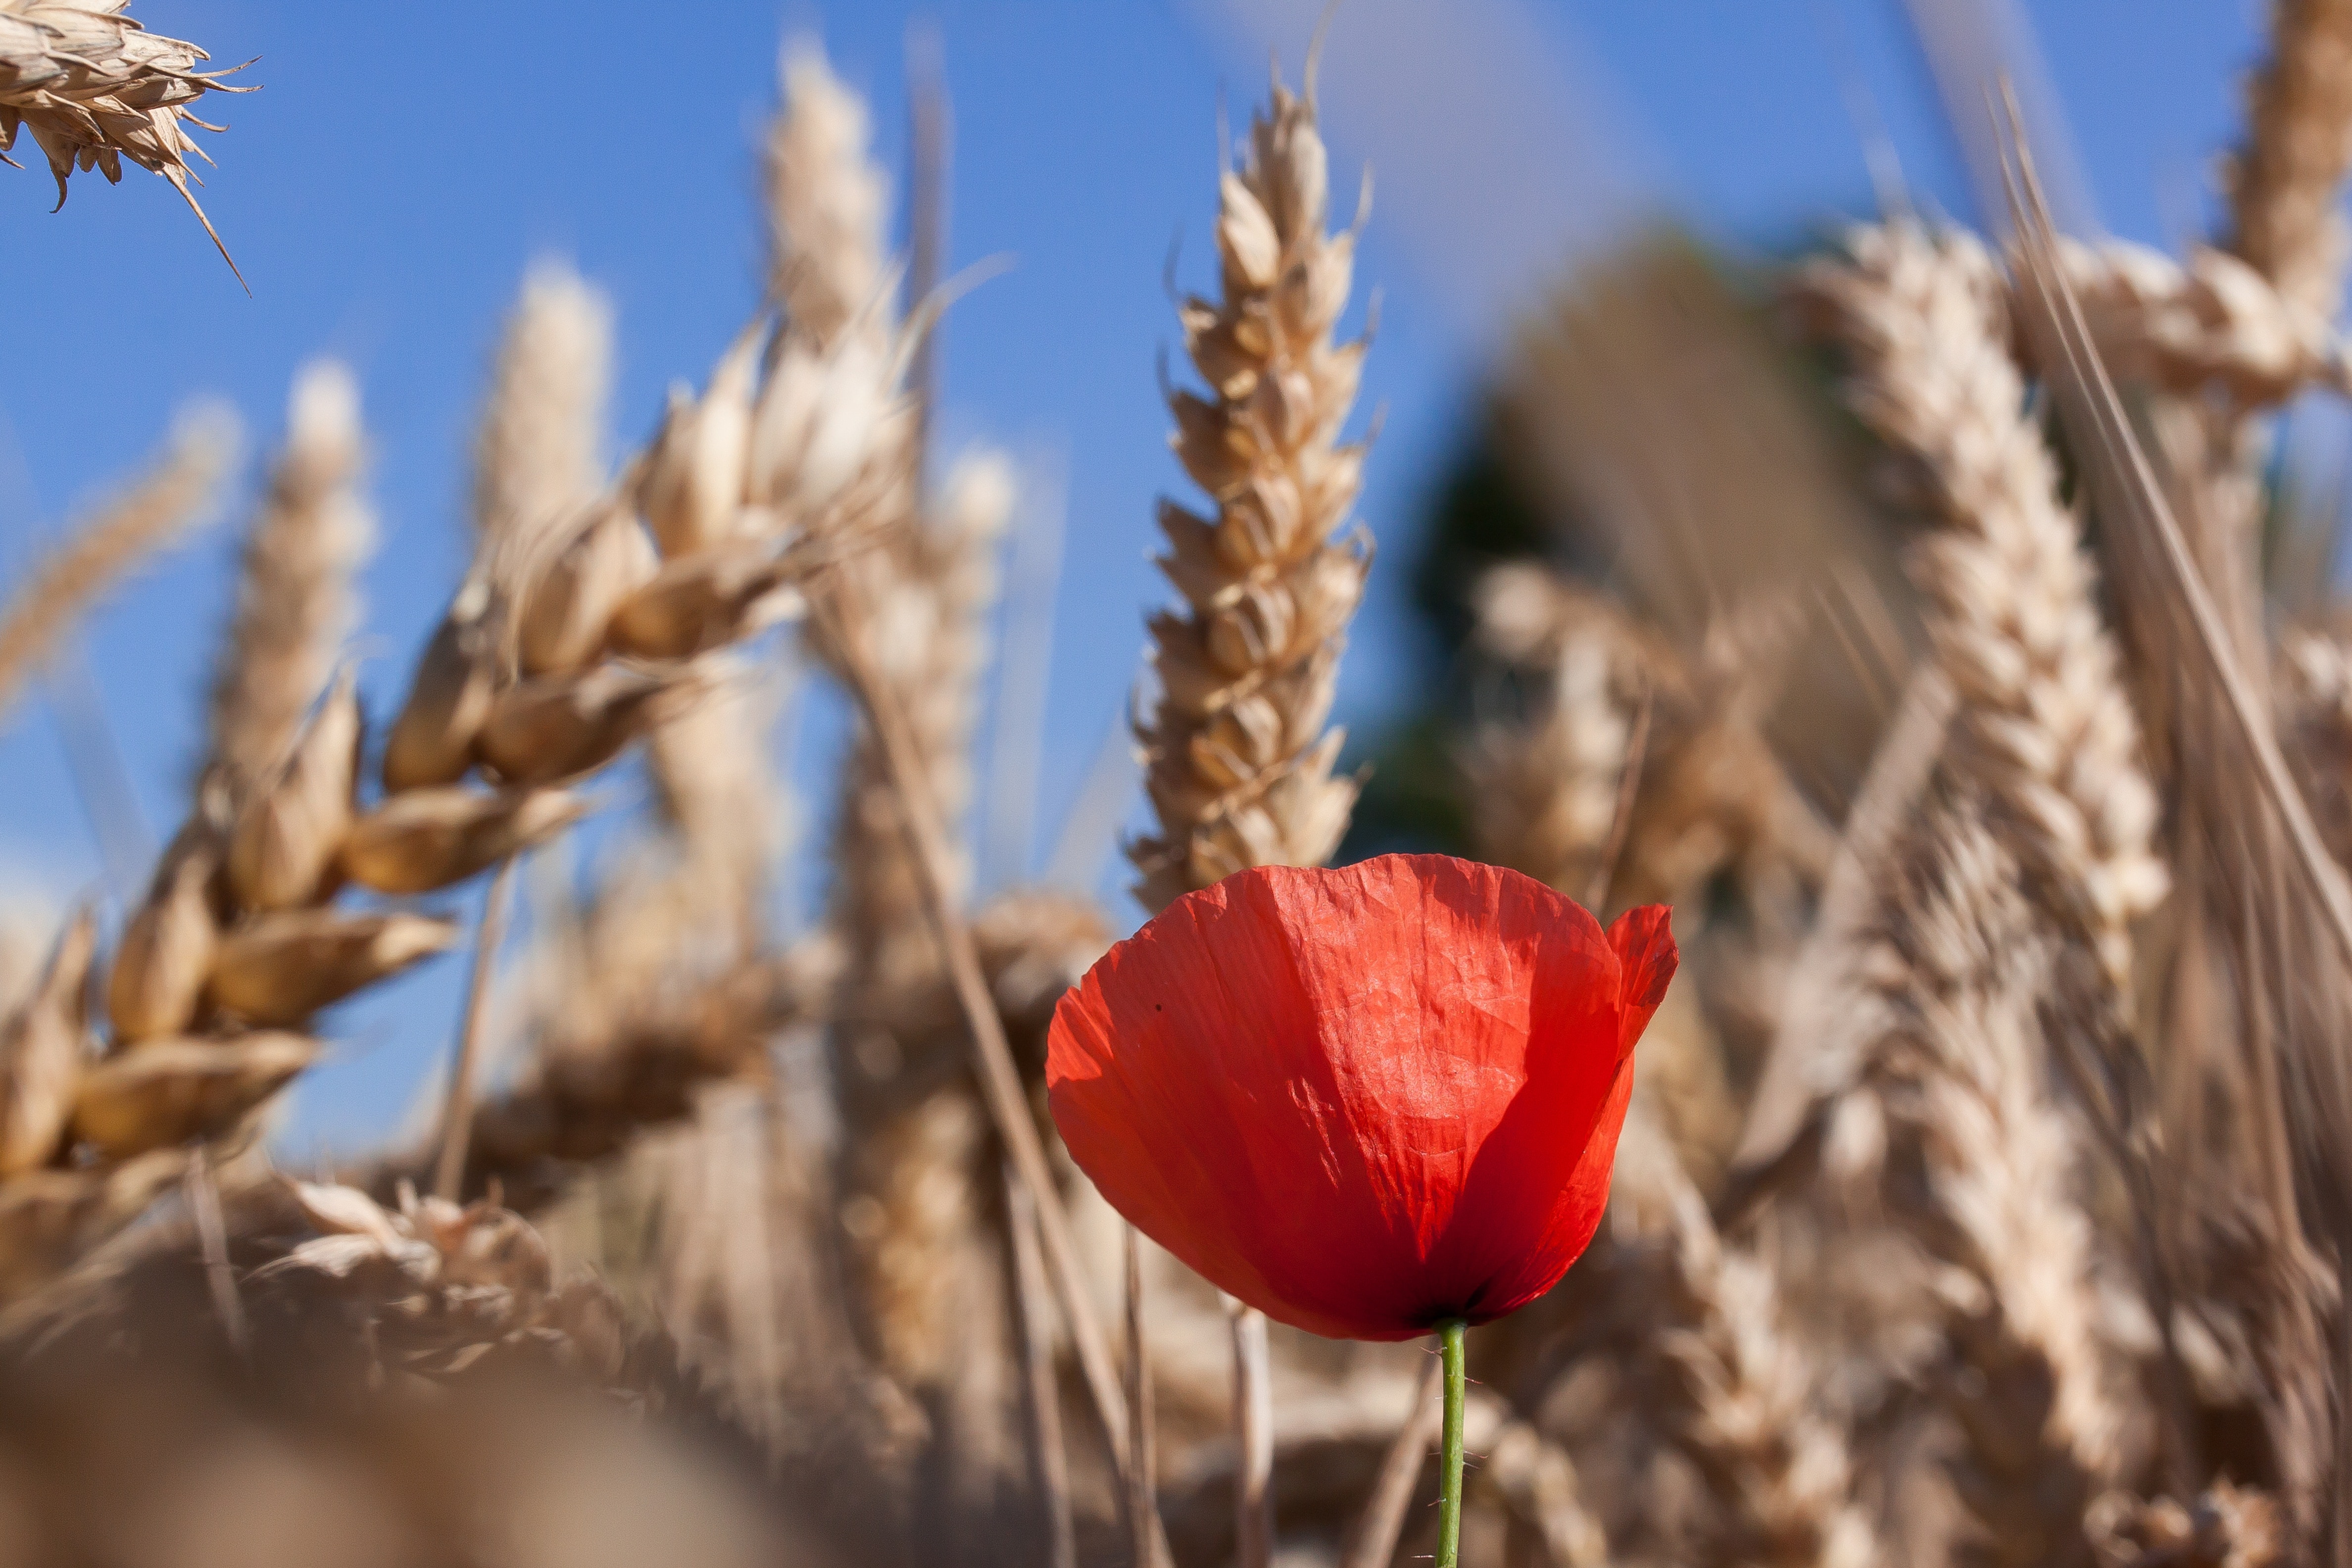 red clustered petal flower and wheat grains